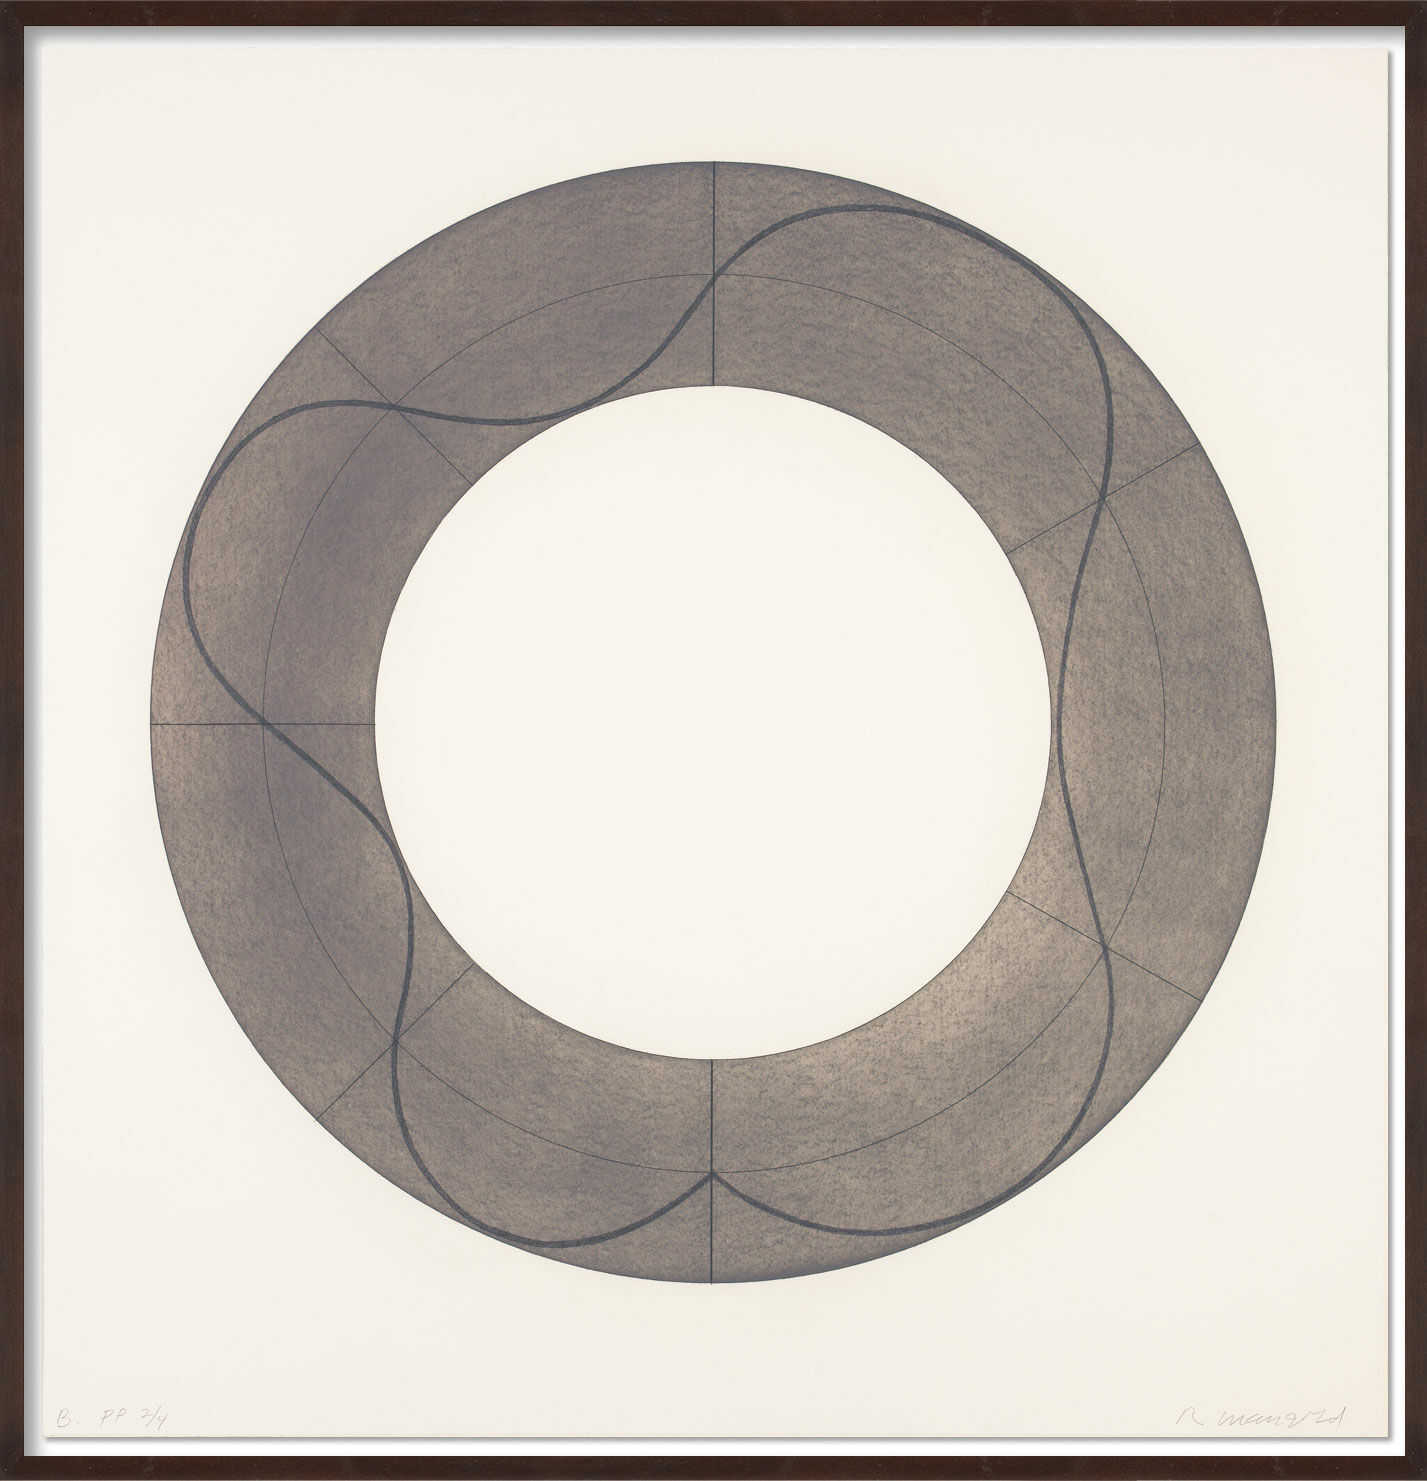 Picture "Ring Image B" (2008) by Robert Mangold